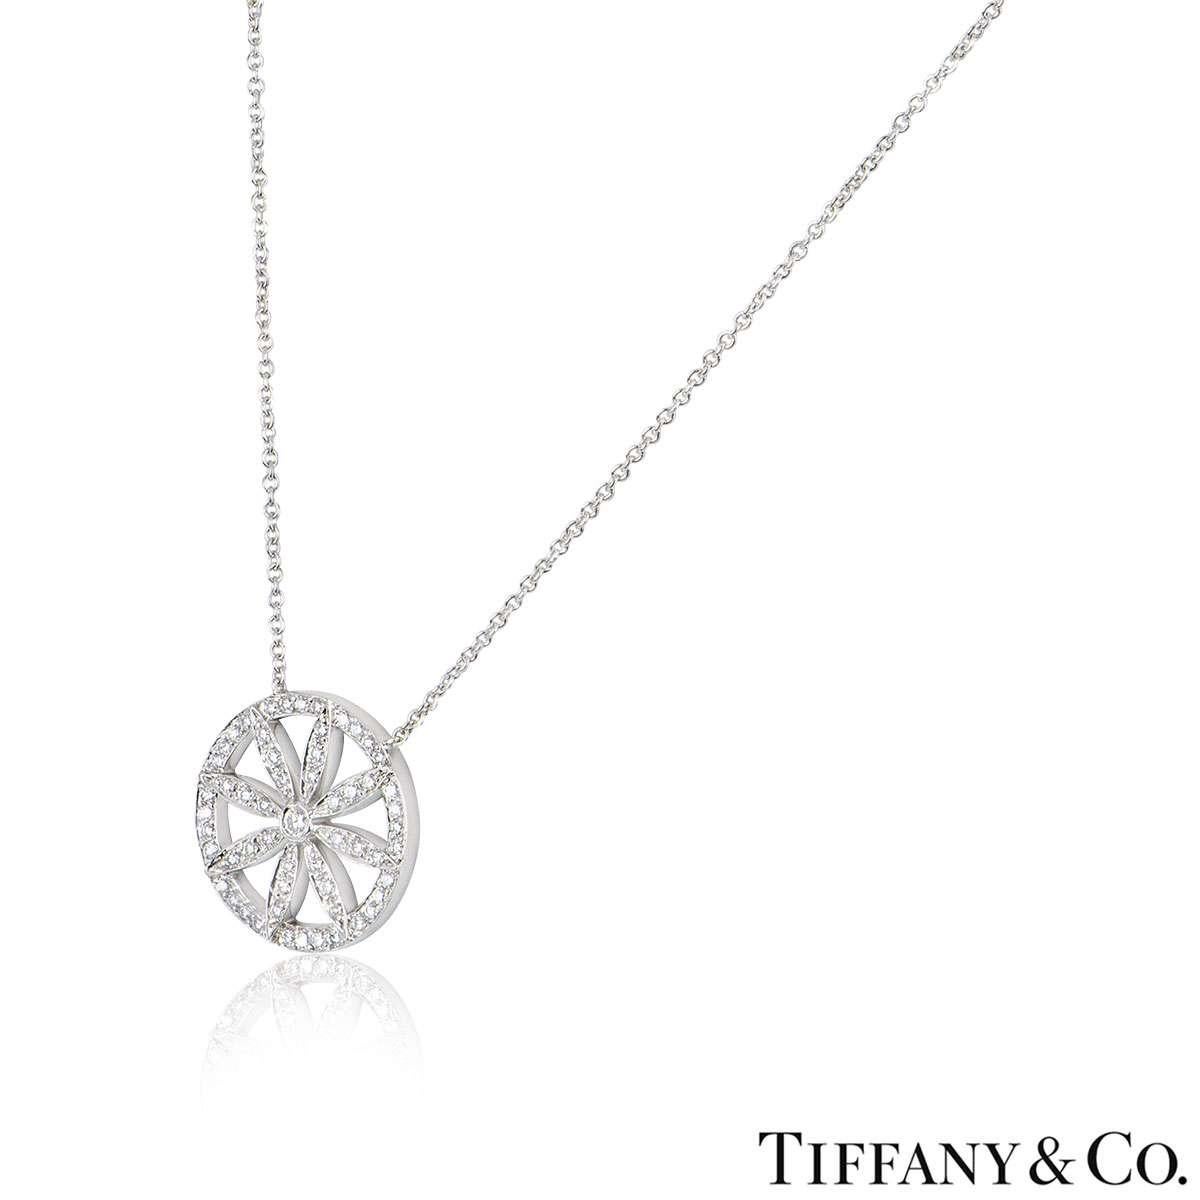 A beautiful platinum flower necklace by Tiffany & Co. The necklace features an openwork diamond set circular motif with a flower in the centre. There are 57 round brilliant cut diamonds with a total diamond weight of approximately 0.61ct. The motif